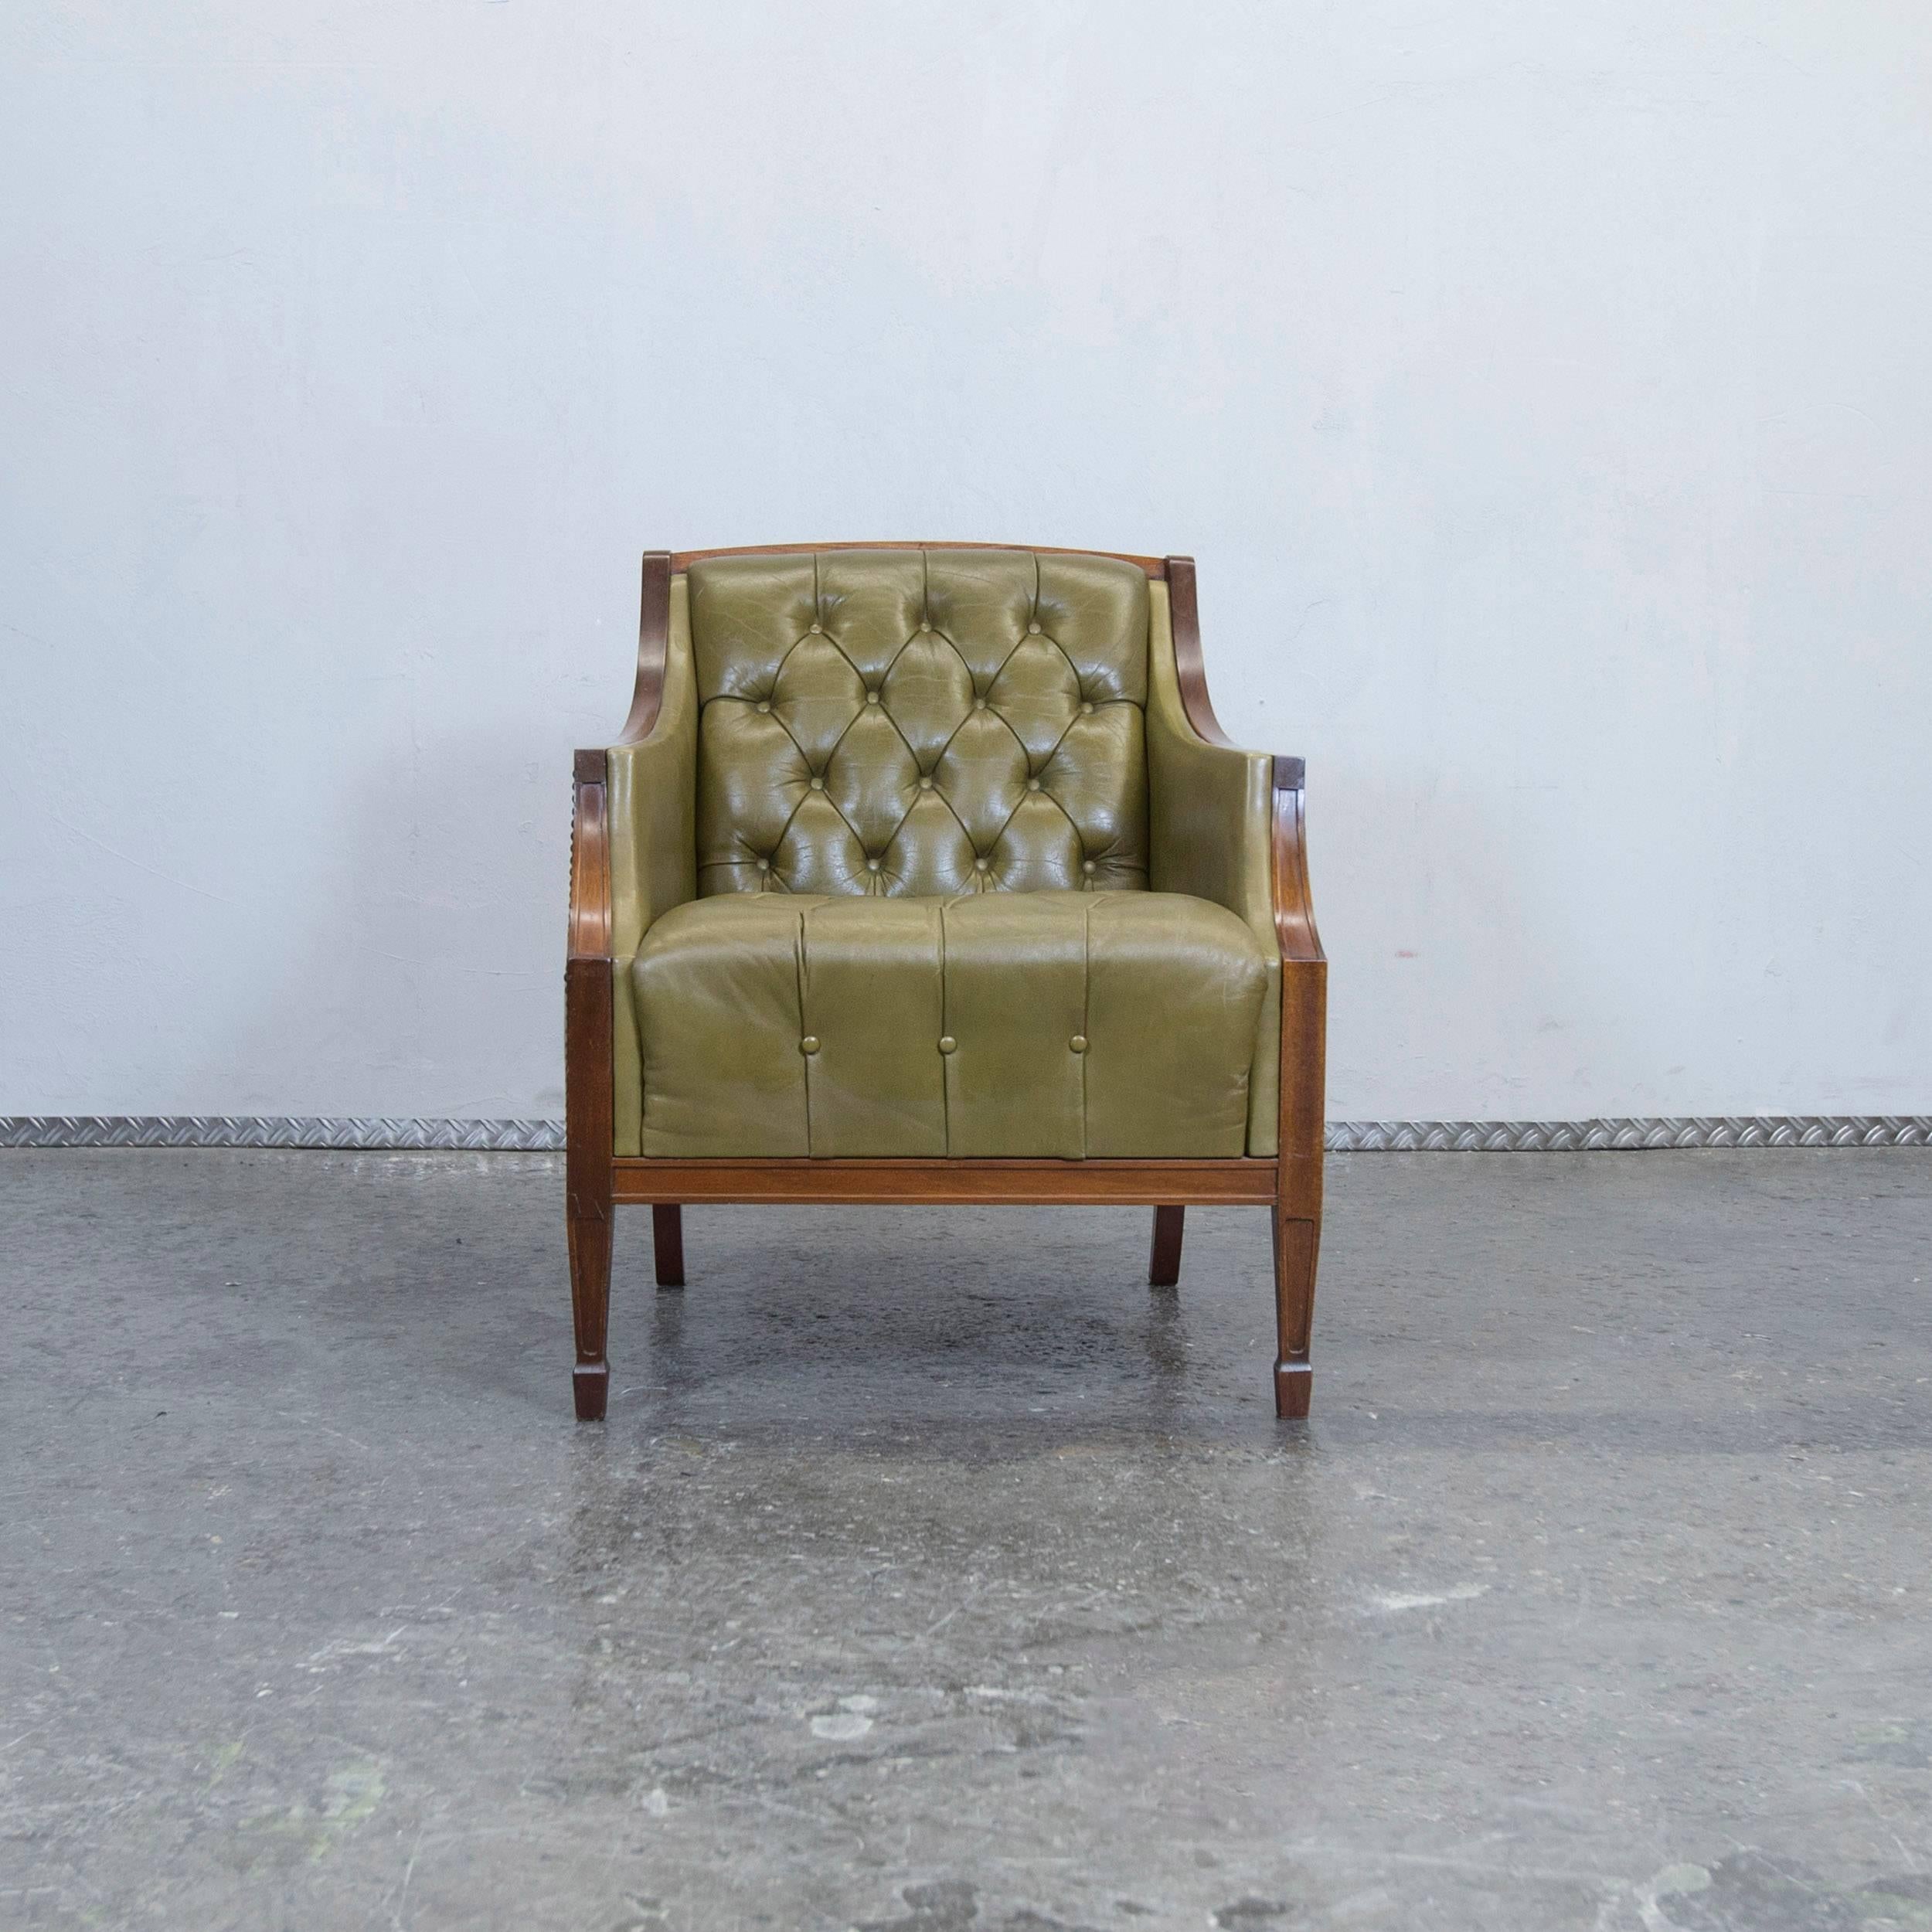 Green colored original Chesterfield leather armchair in a vintage design, made for pure comfort and elegance.